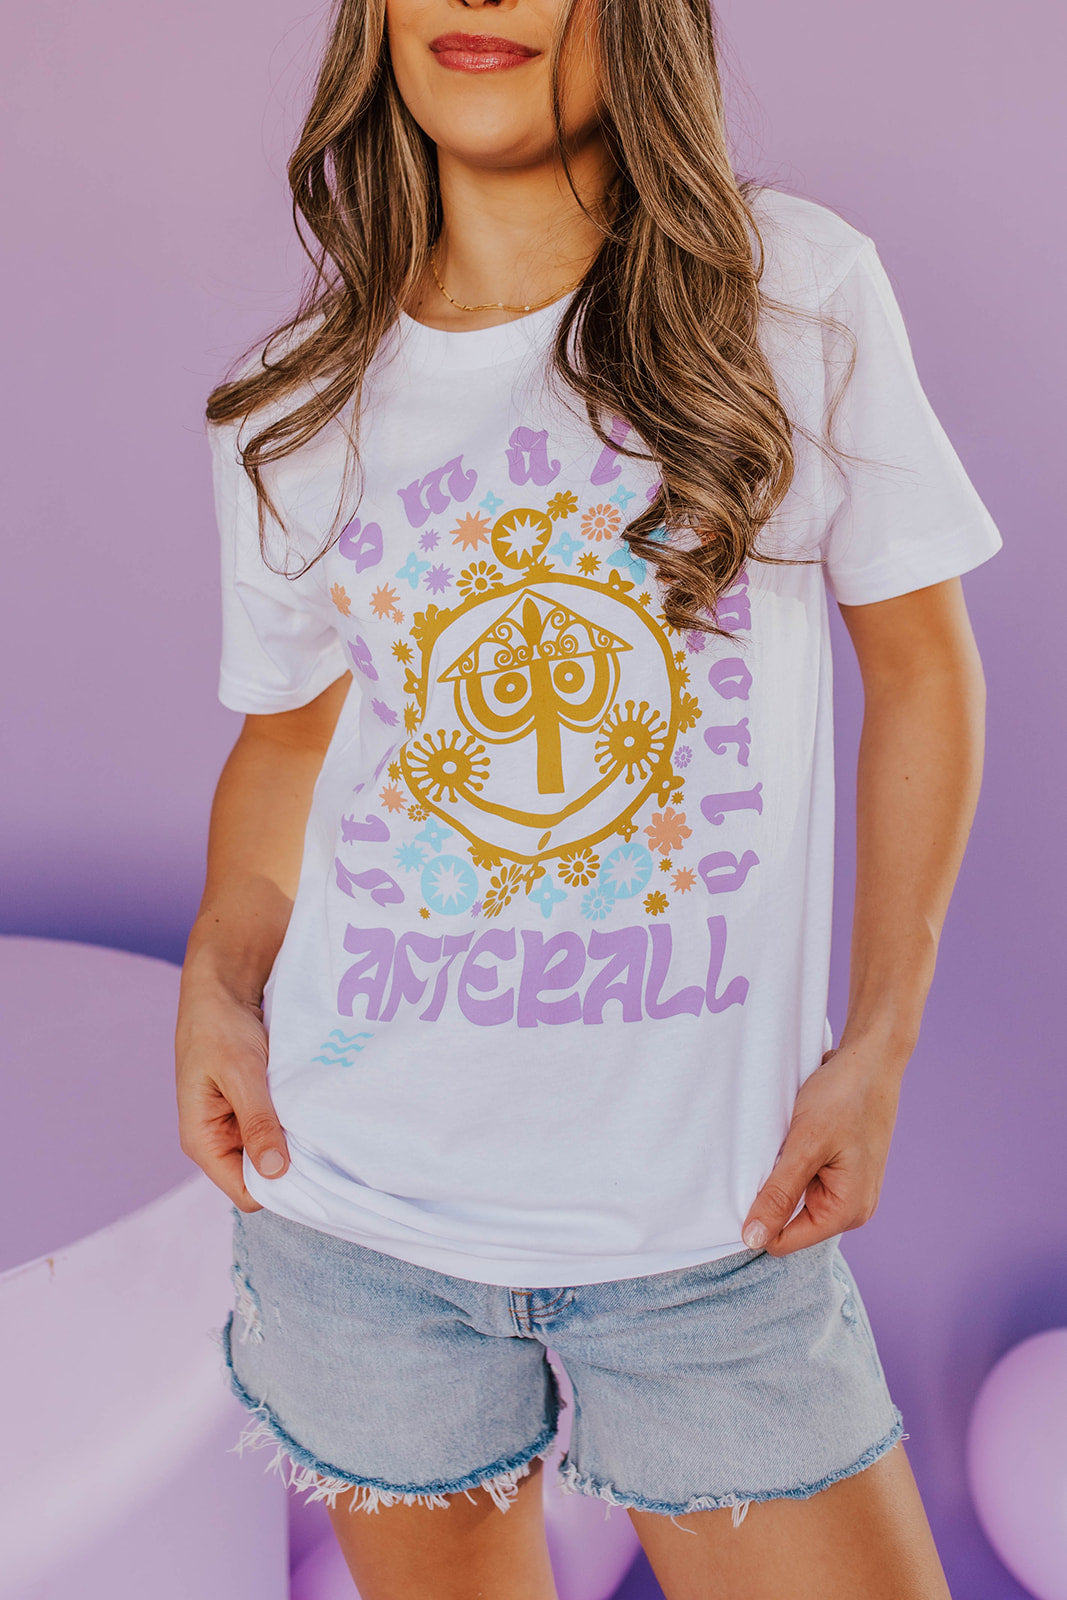 THE SMALL WORLD IN COLOR ADULT TEE BY HAPPY THREADS X PINK DESERT